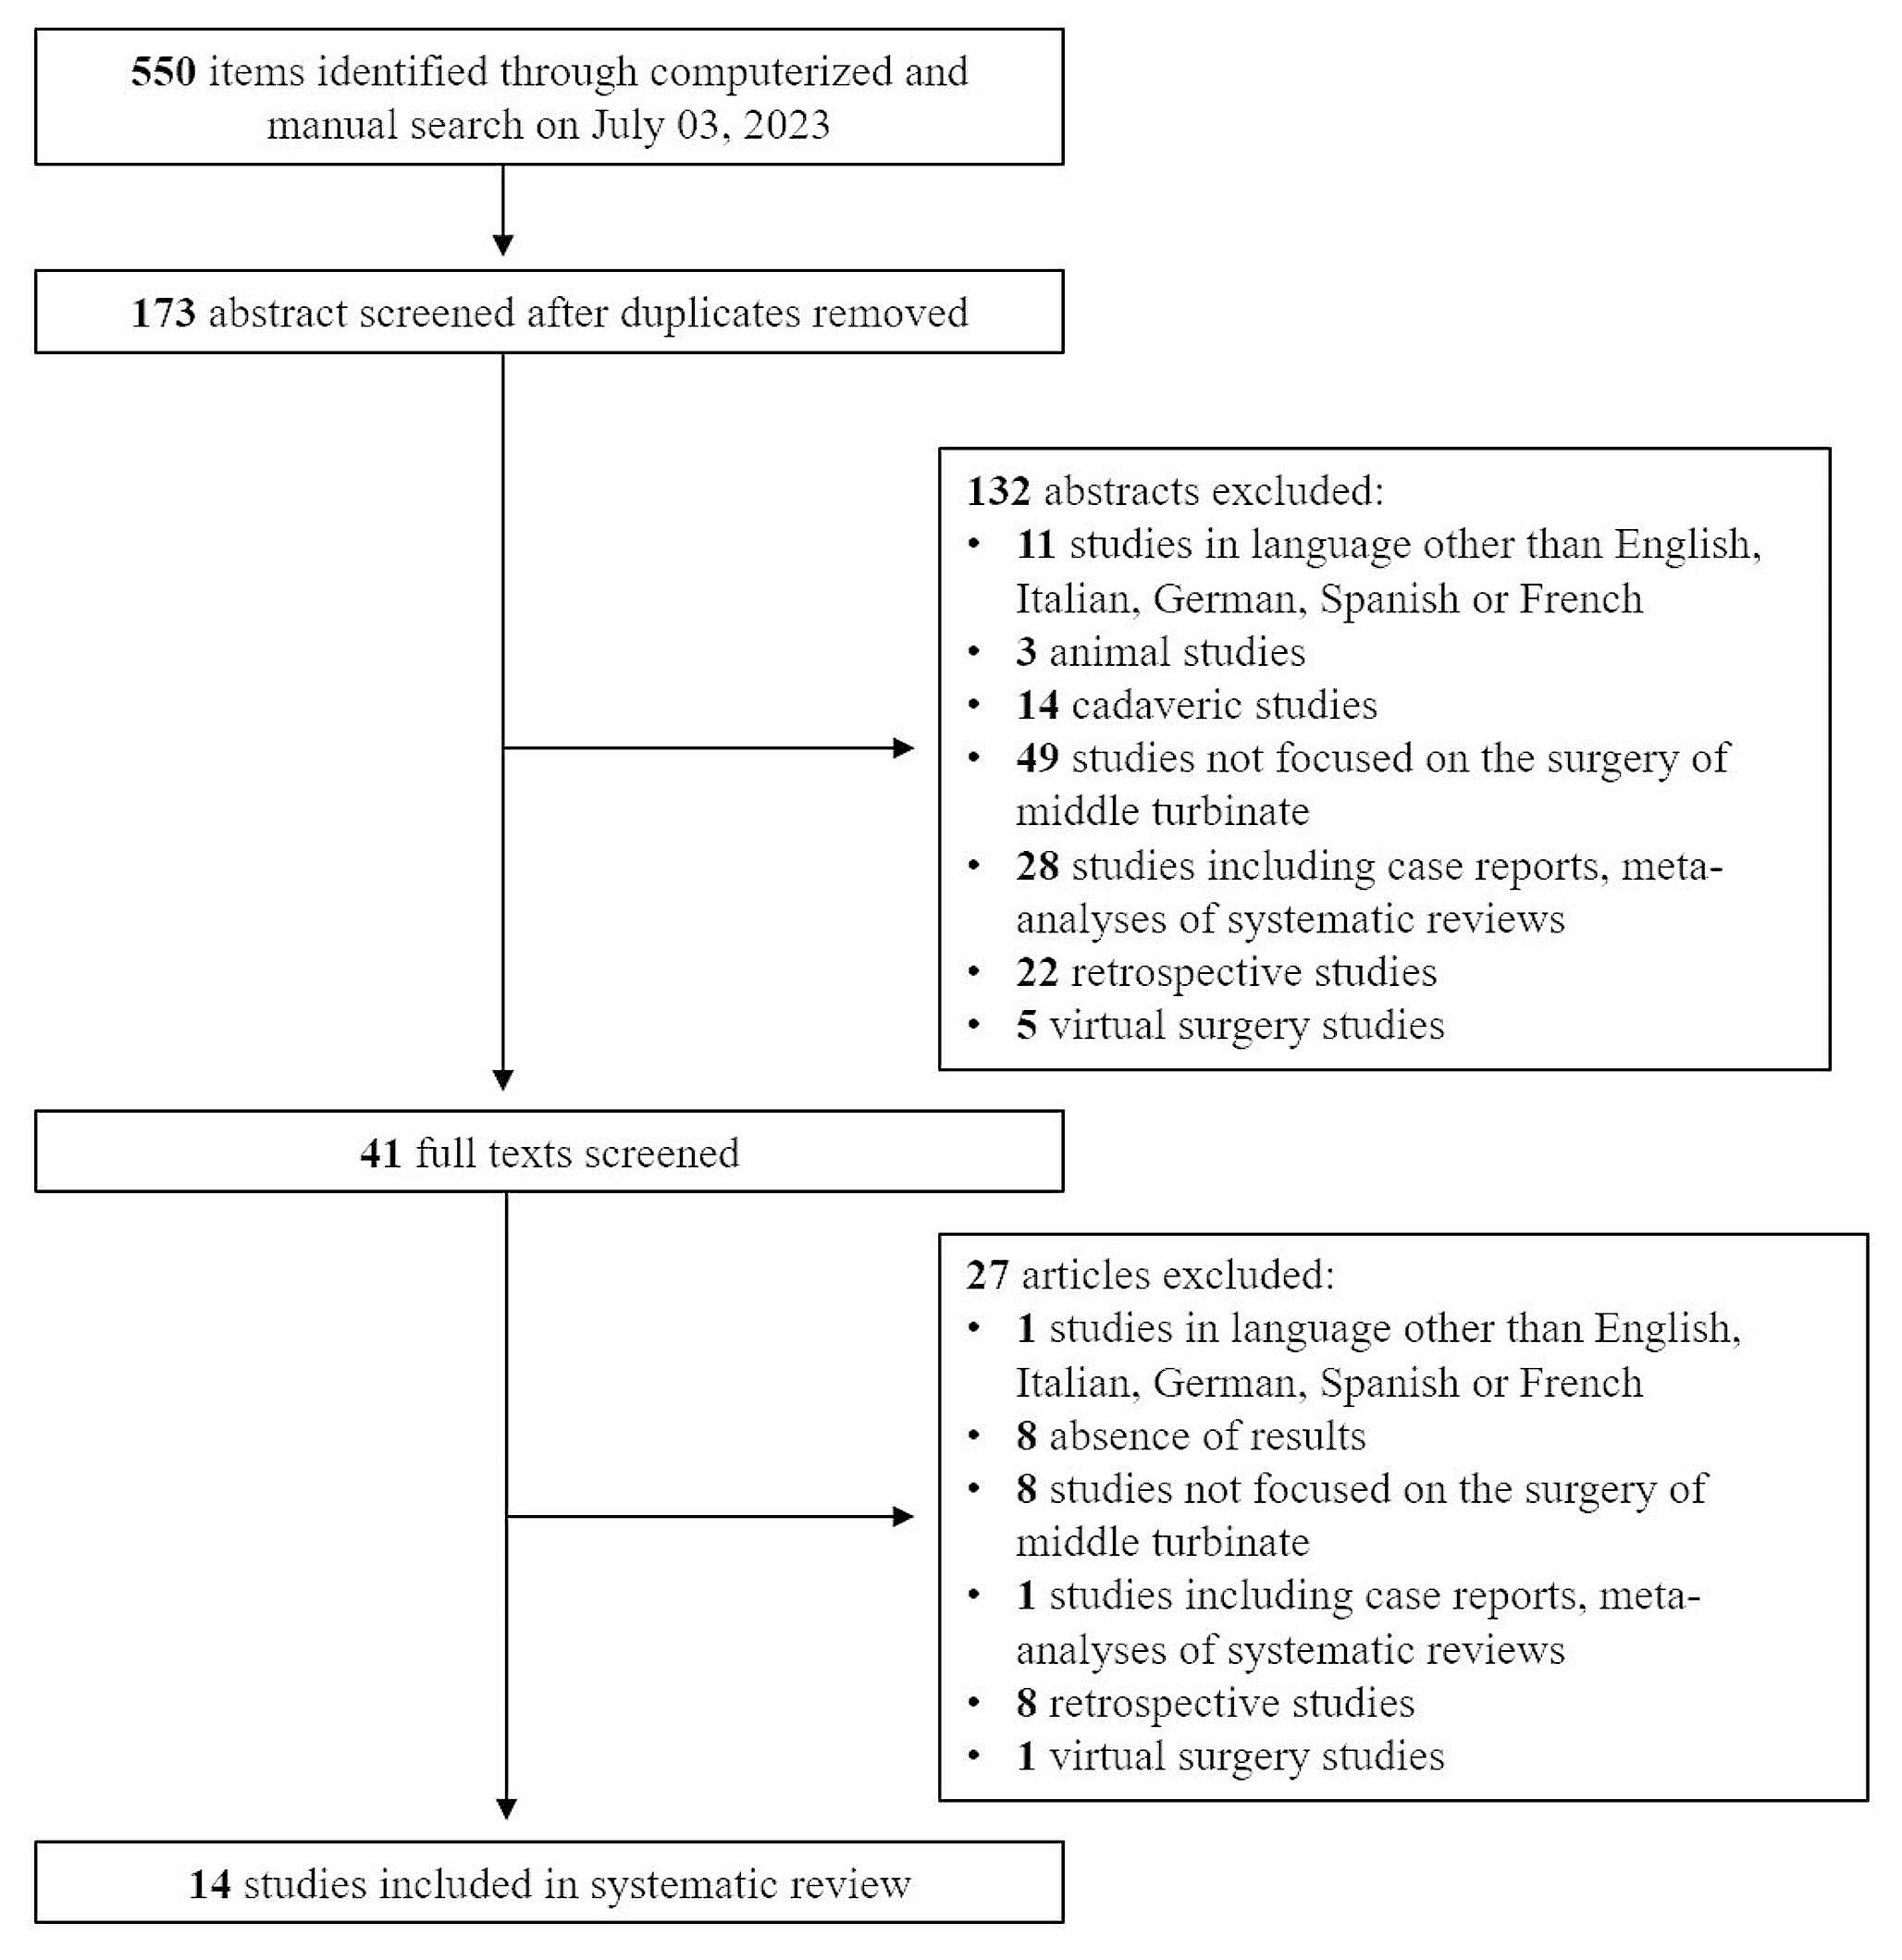 Efficacy and safety of middle turbinate surgery: a systematic review